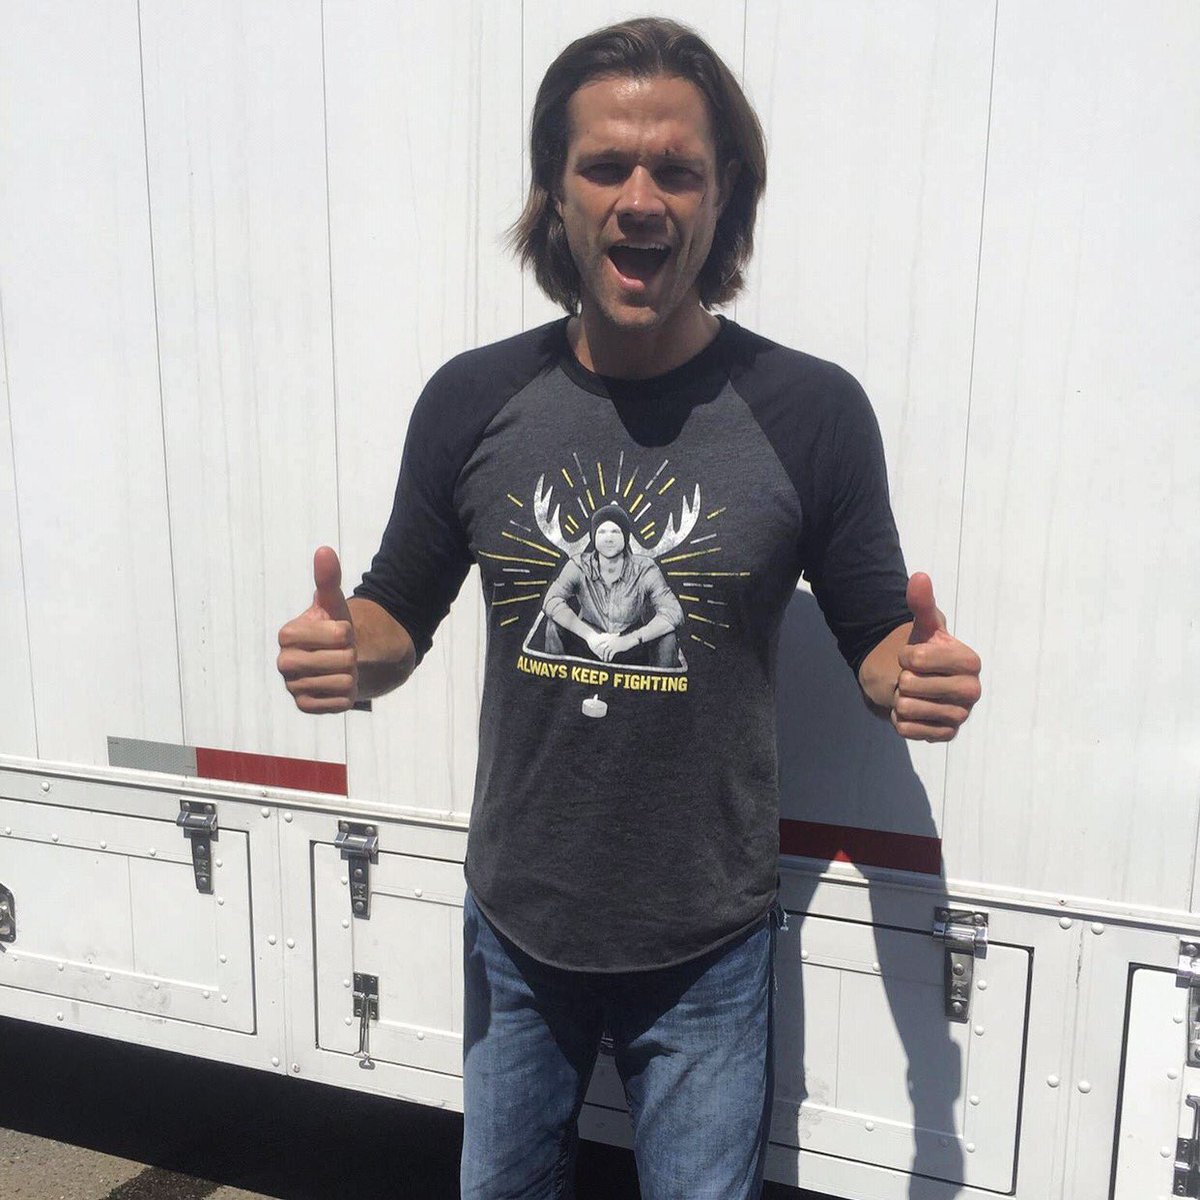 #TBT to the original AKF Part III !! Last few hours to support this represent.com/Jared relaunch !! #ThumbsUp